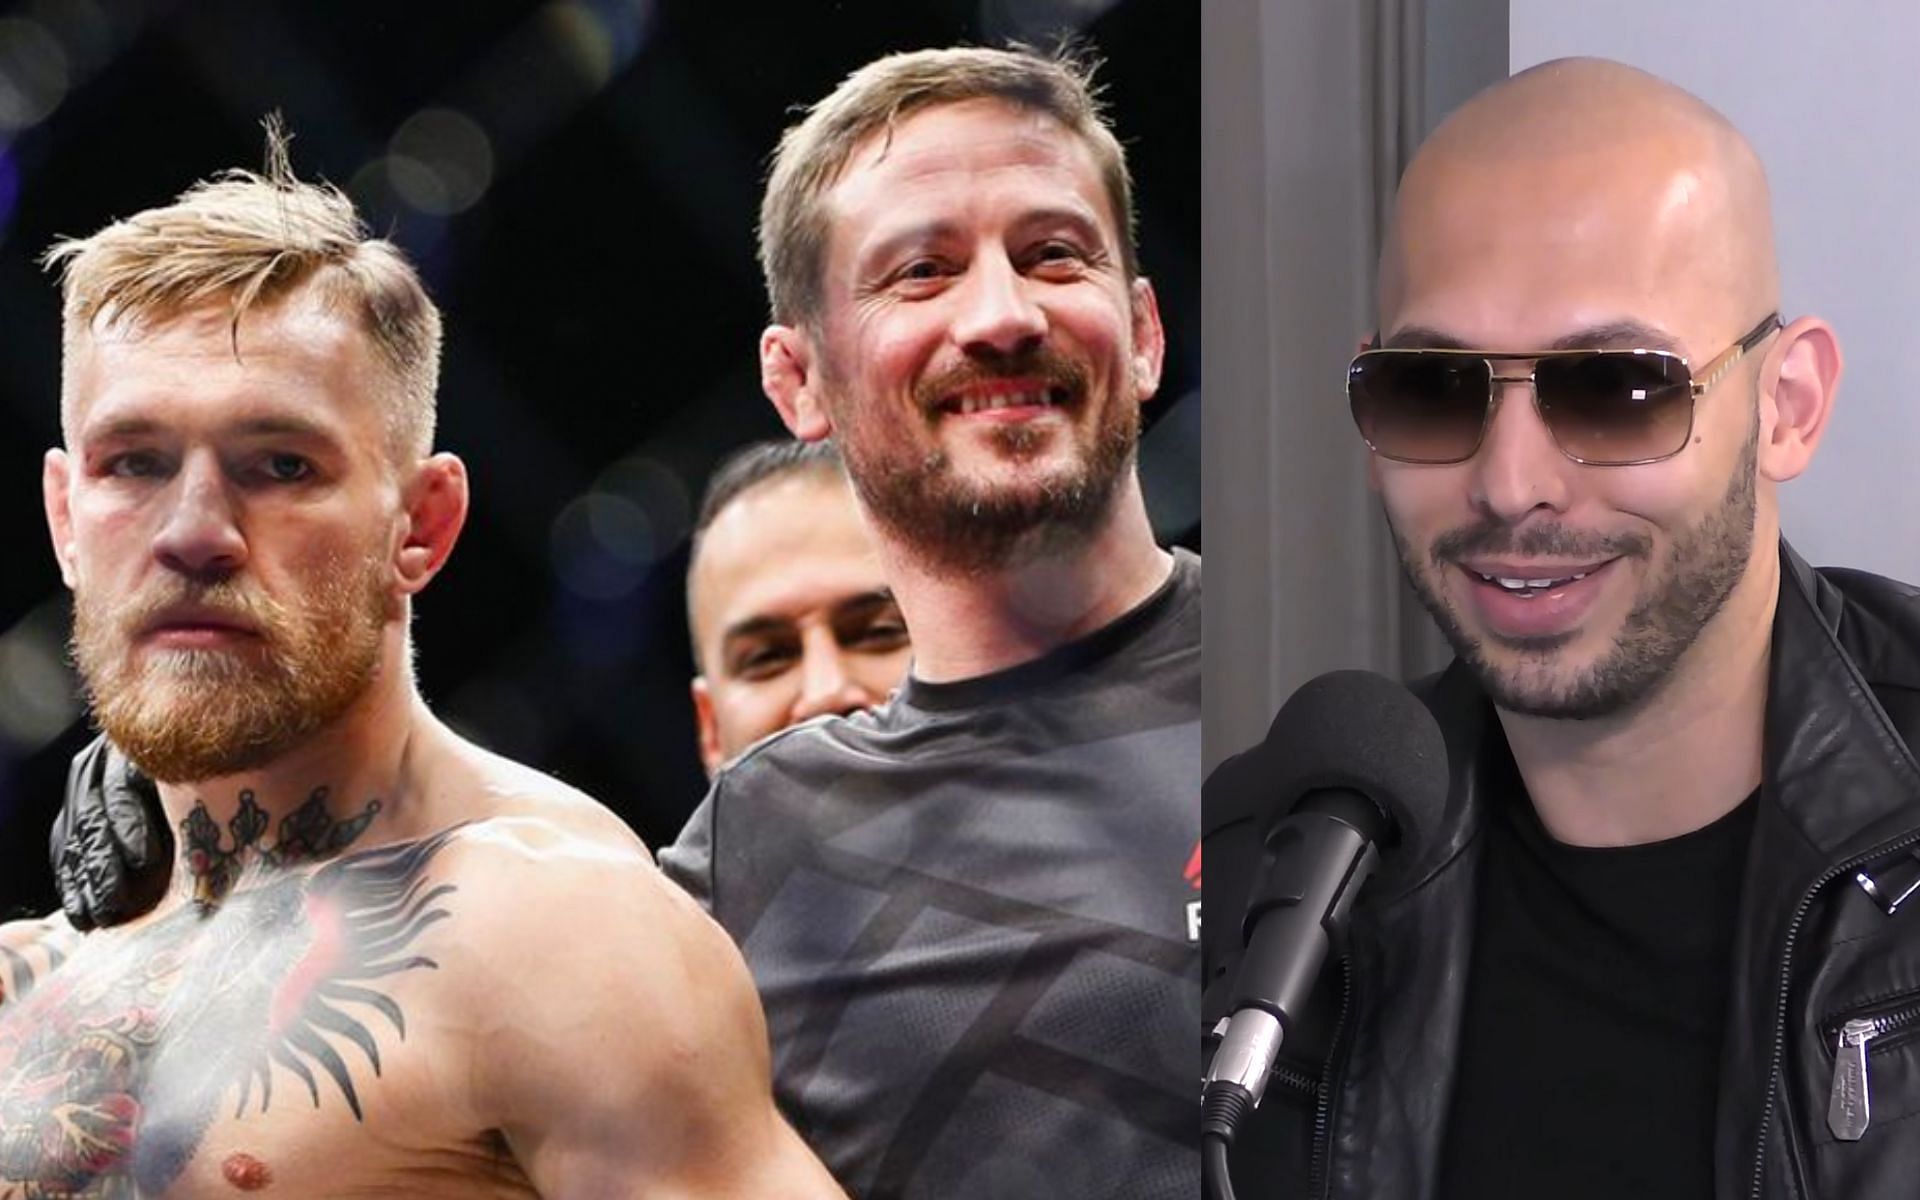 Conor McGregor and John Kavanagh (left) and Andrew Tate (right). [Images courtesy: left image from Getty Images and right image from Wikipedia]